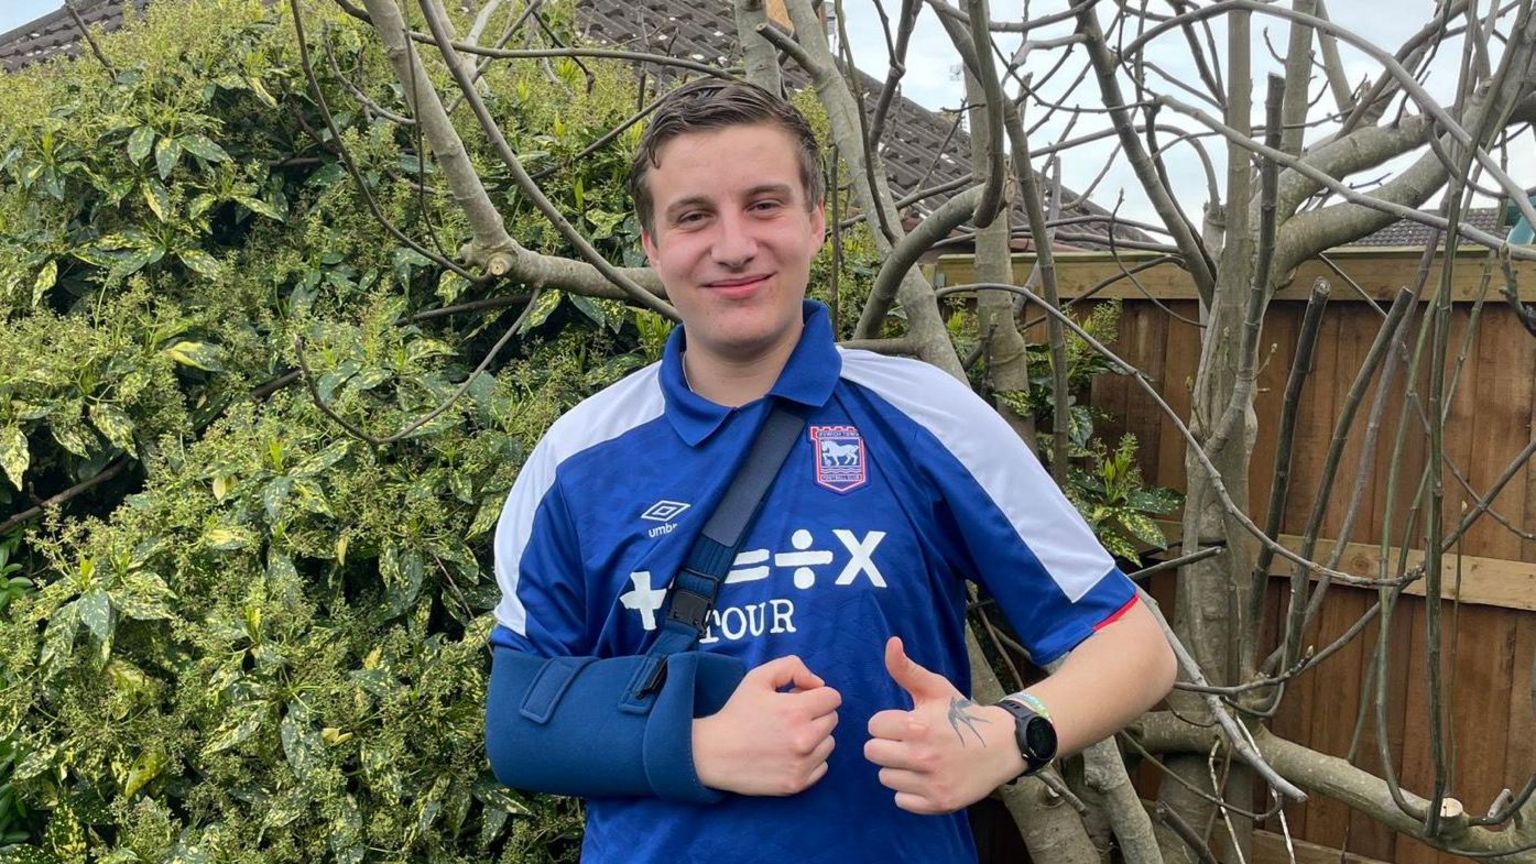 Rémi Mills poses with his shoulder bandage after dislocating his shoulder at an Ipswich Town game